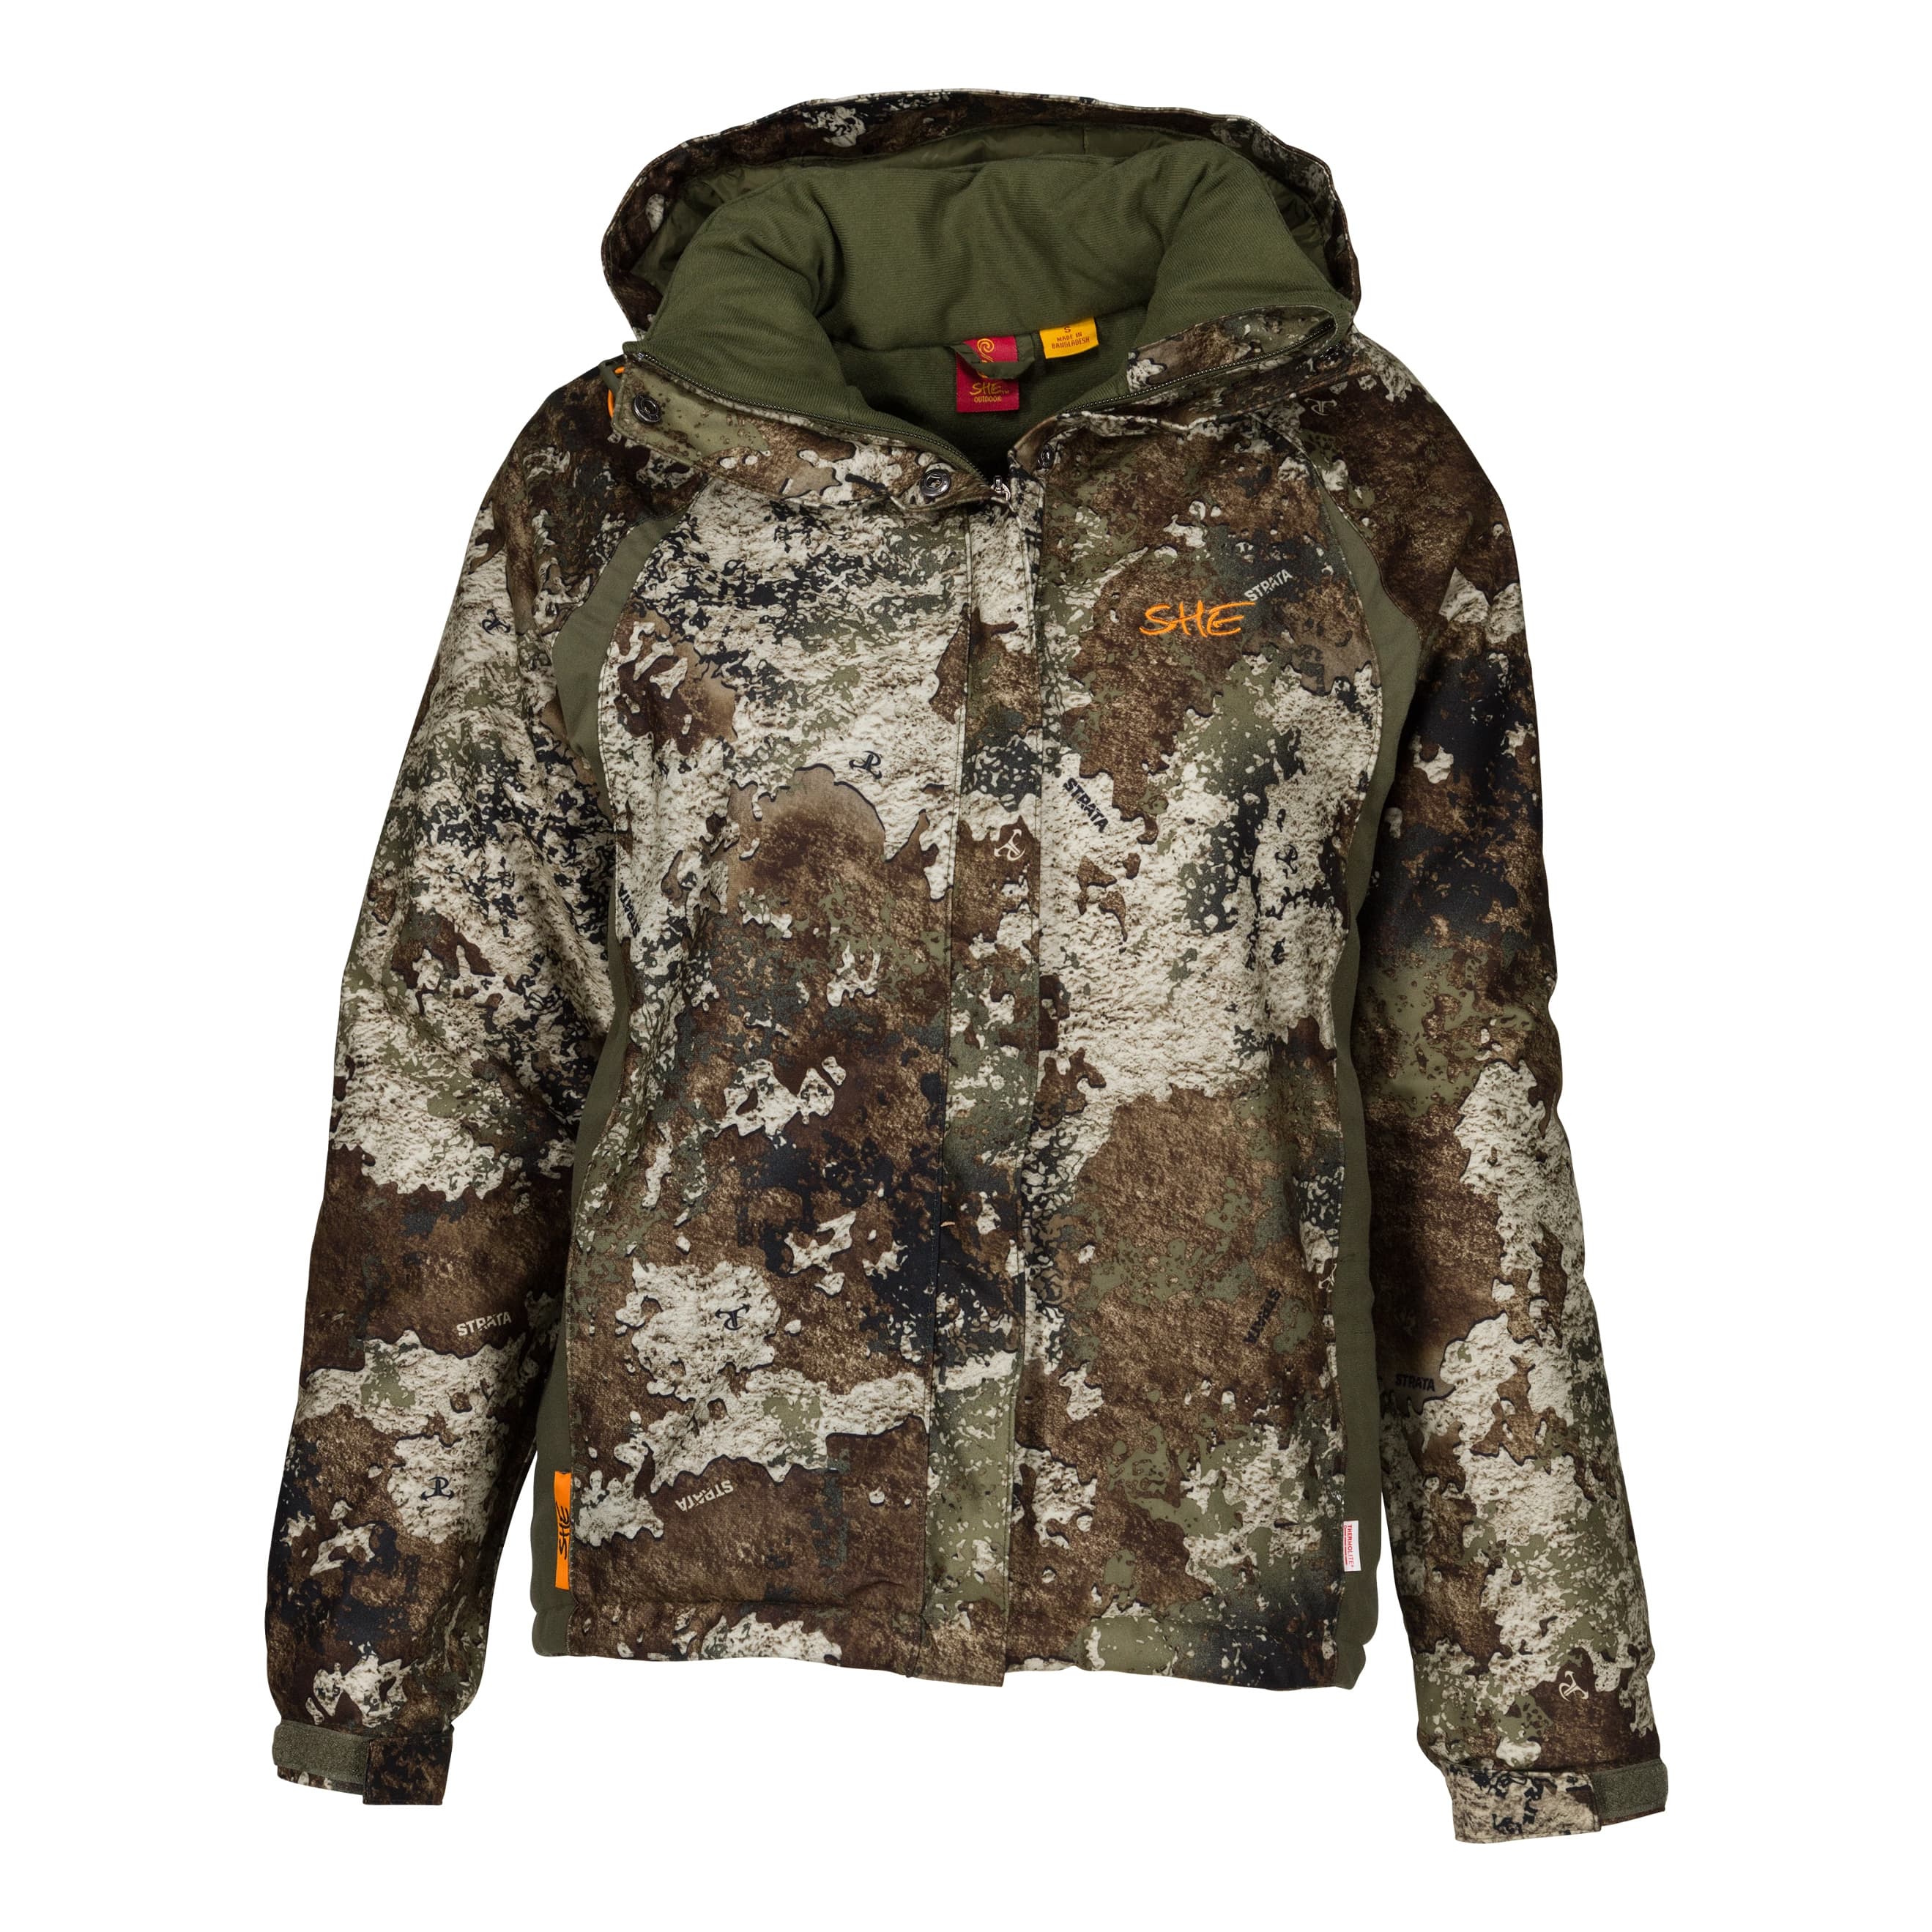 SHE Outdoor® Women's Insulated Jacket